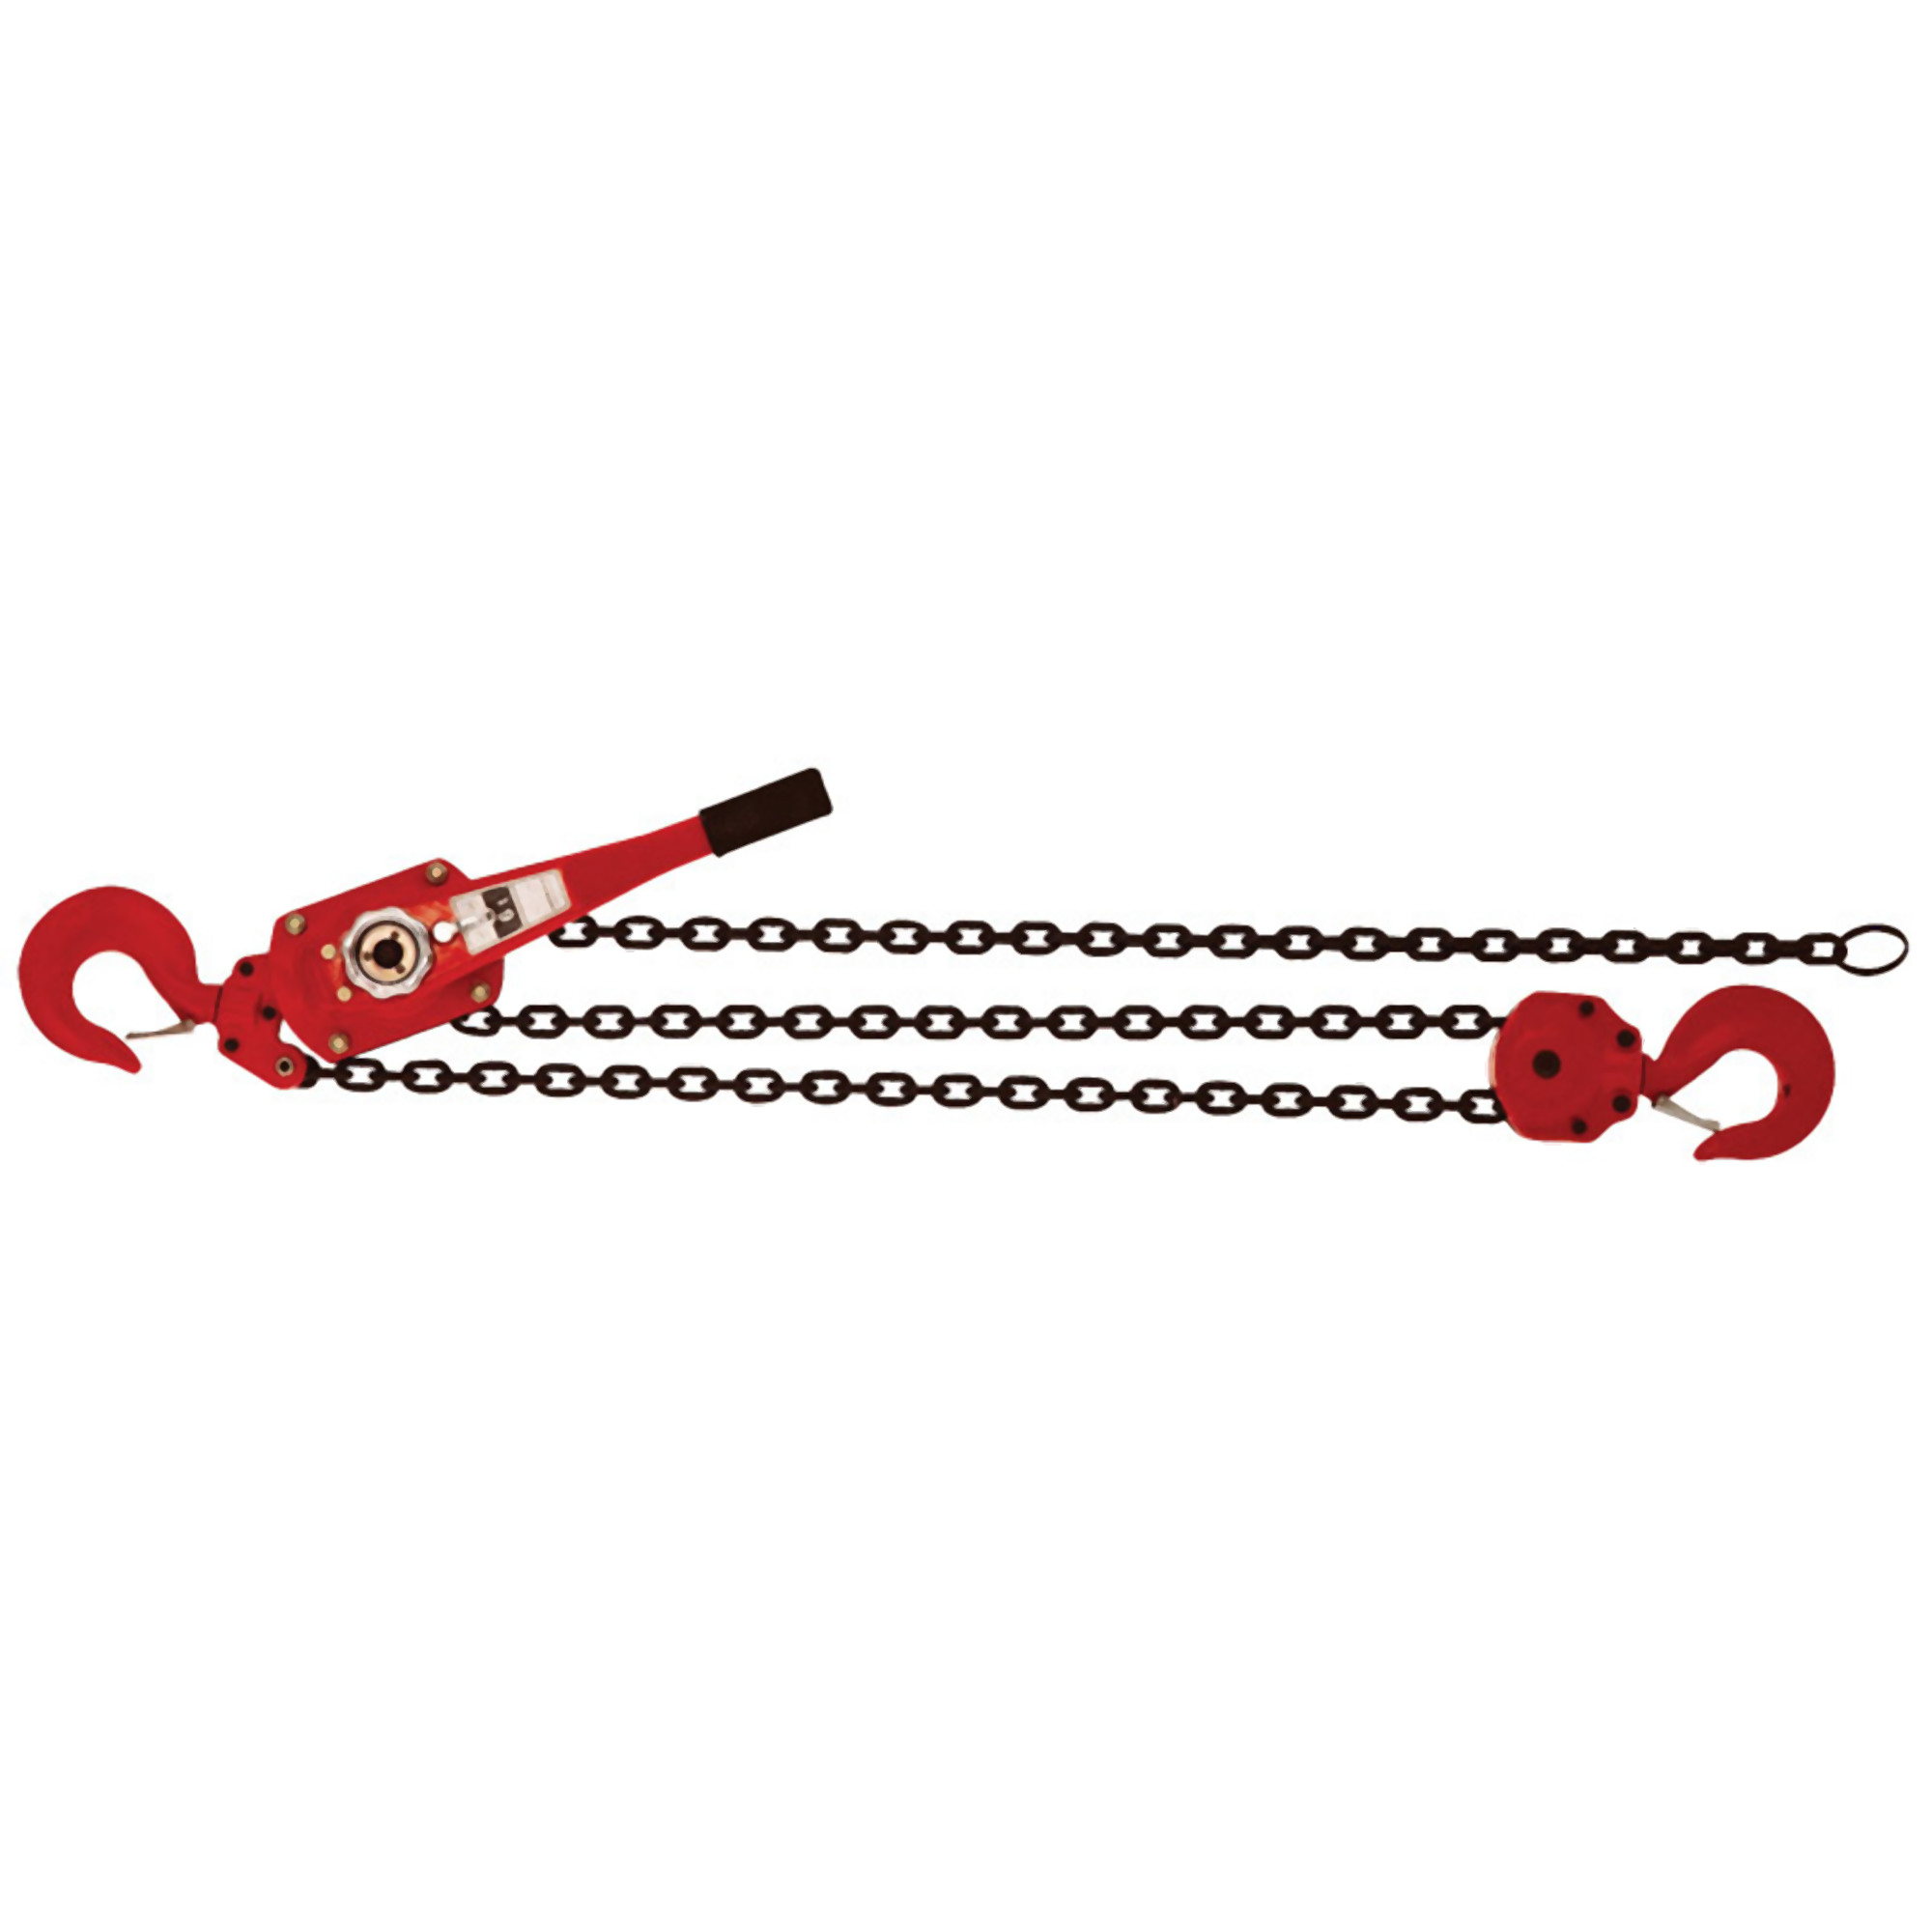 American Power Pull, 6 ton chain puller, Power Source Manual Lever, Capacity 12000 lb, Lift Height 5 ft, Model 660